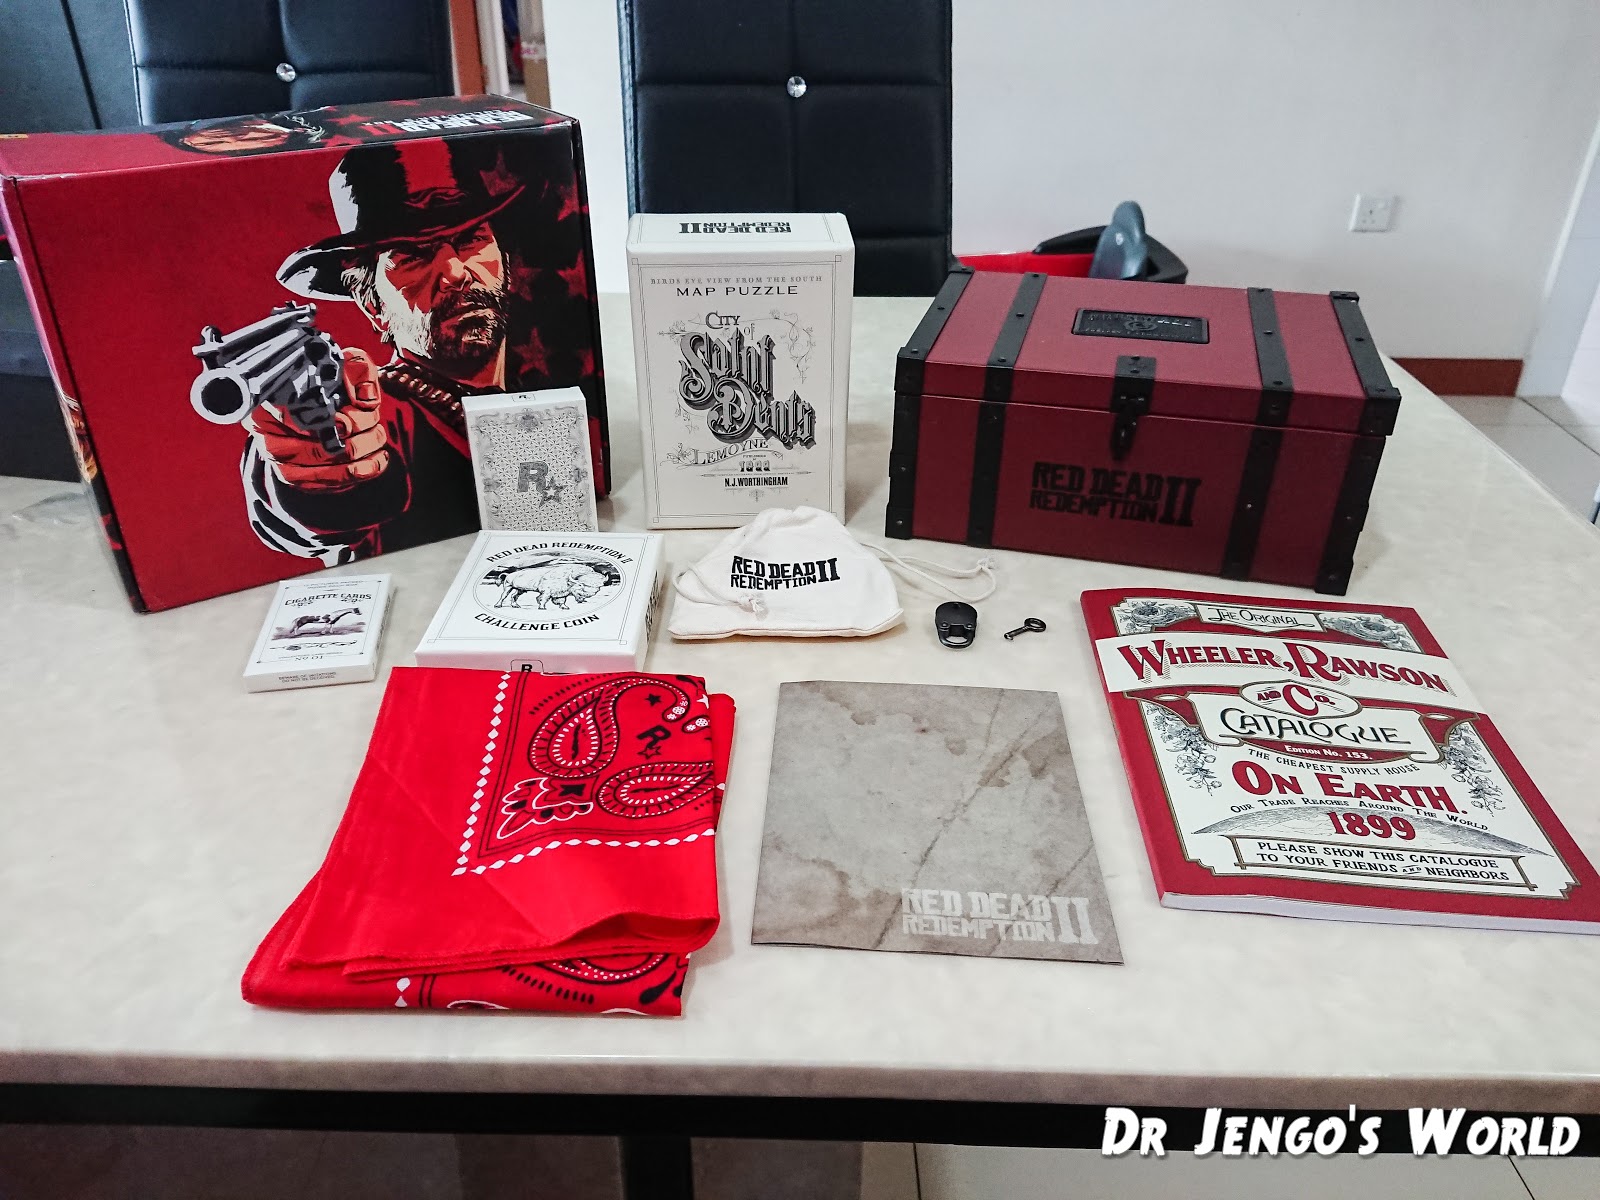 Jengo's World: Red Dead Redemption 2 Collector's Box Collection Pics